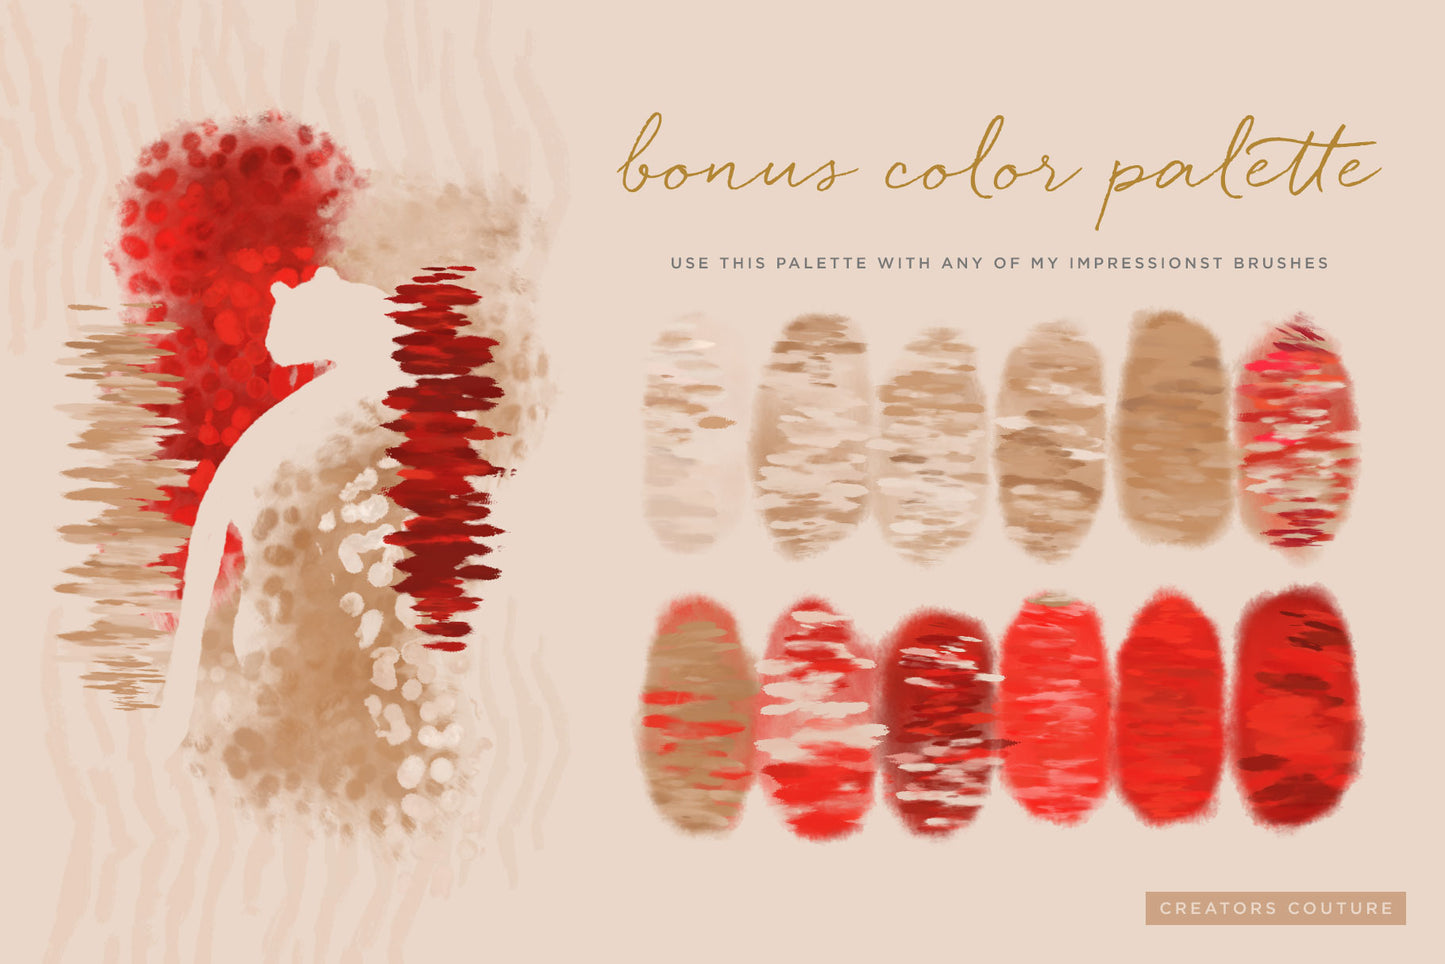 Exotic Leopard & Animal Print Color-Blending & Stamp Photoshop Brushes, bonus color palette, natural tans and red accent